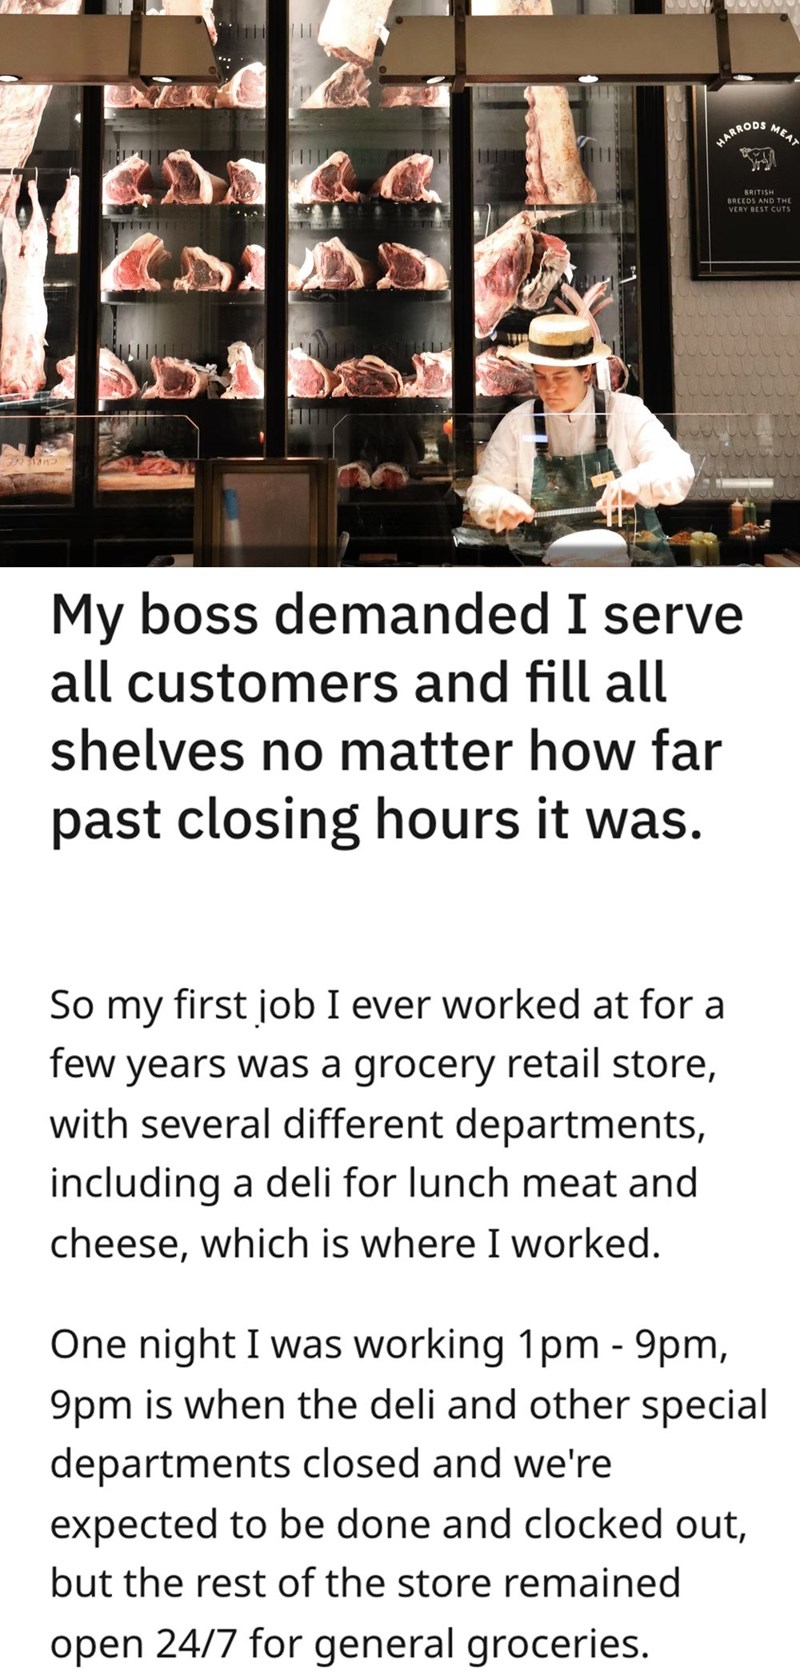 malicious compliance - Tiitti 11 10 1919 Harrods My boss demanded I serve all customers and fill all shelves no matter how far past closing hours it was. So my first job I ever worked at for a few years was a grocery retail store, with several different d